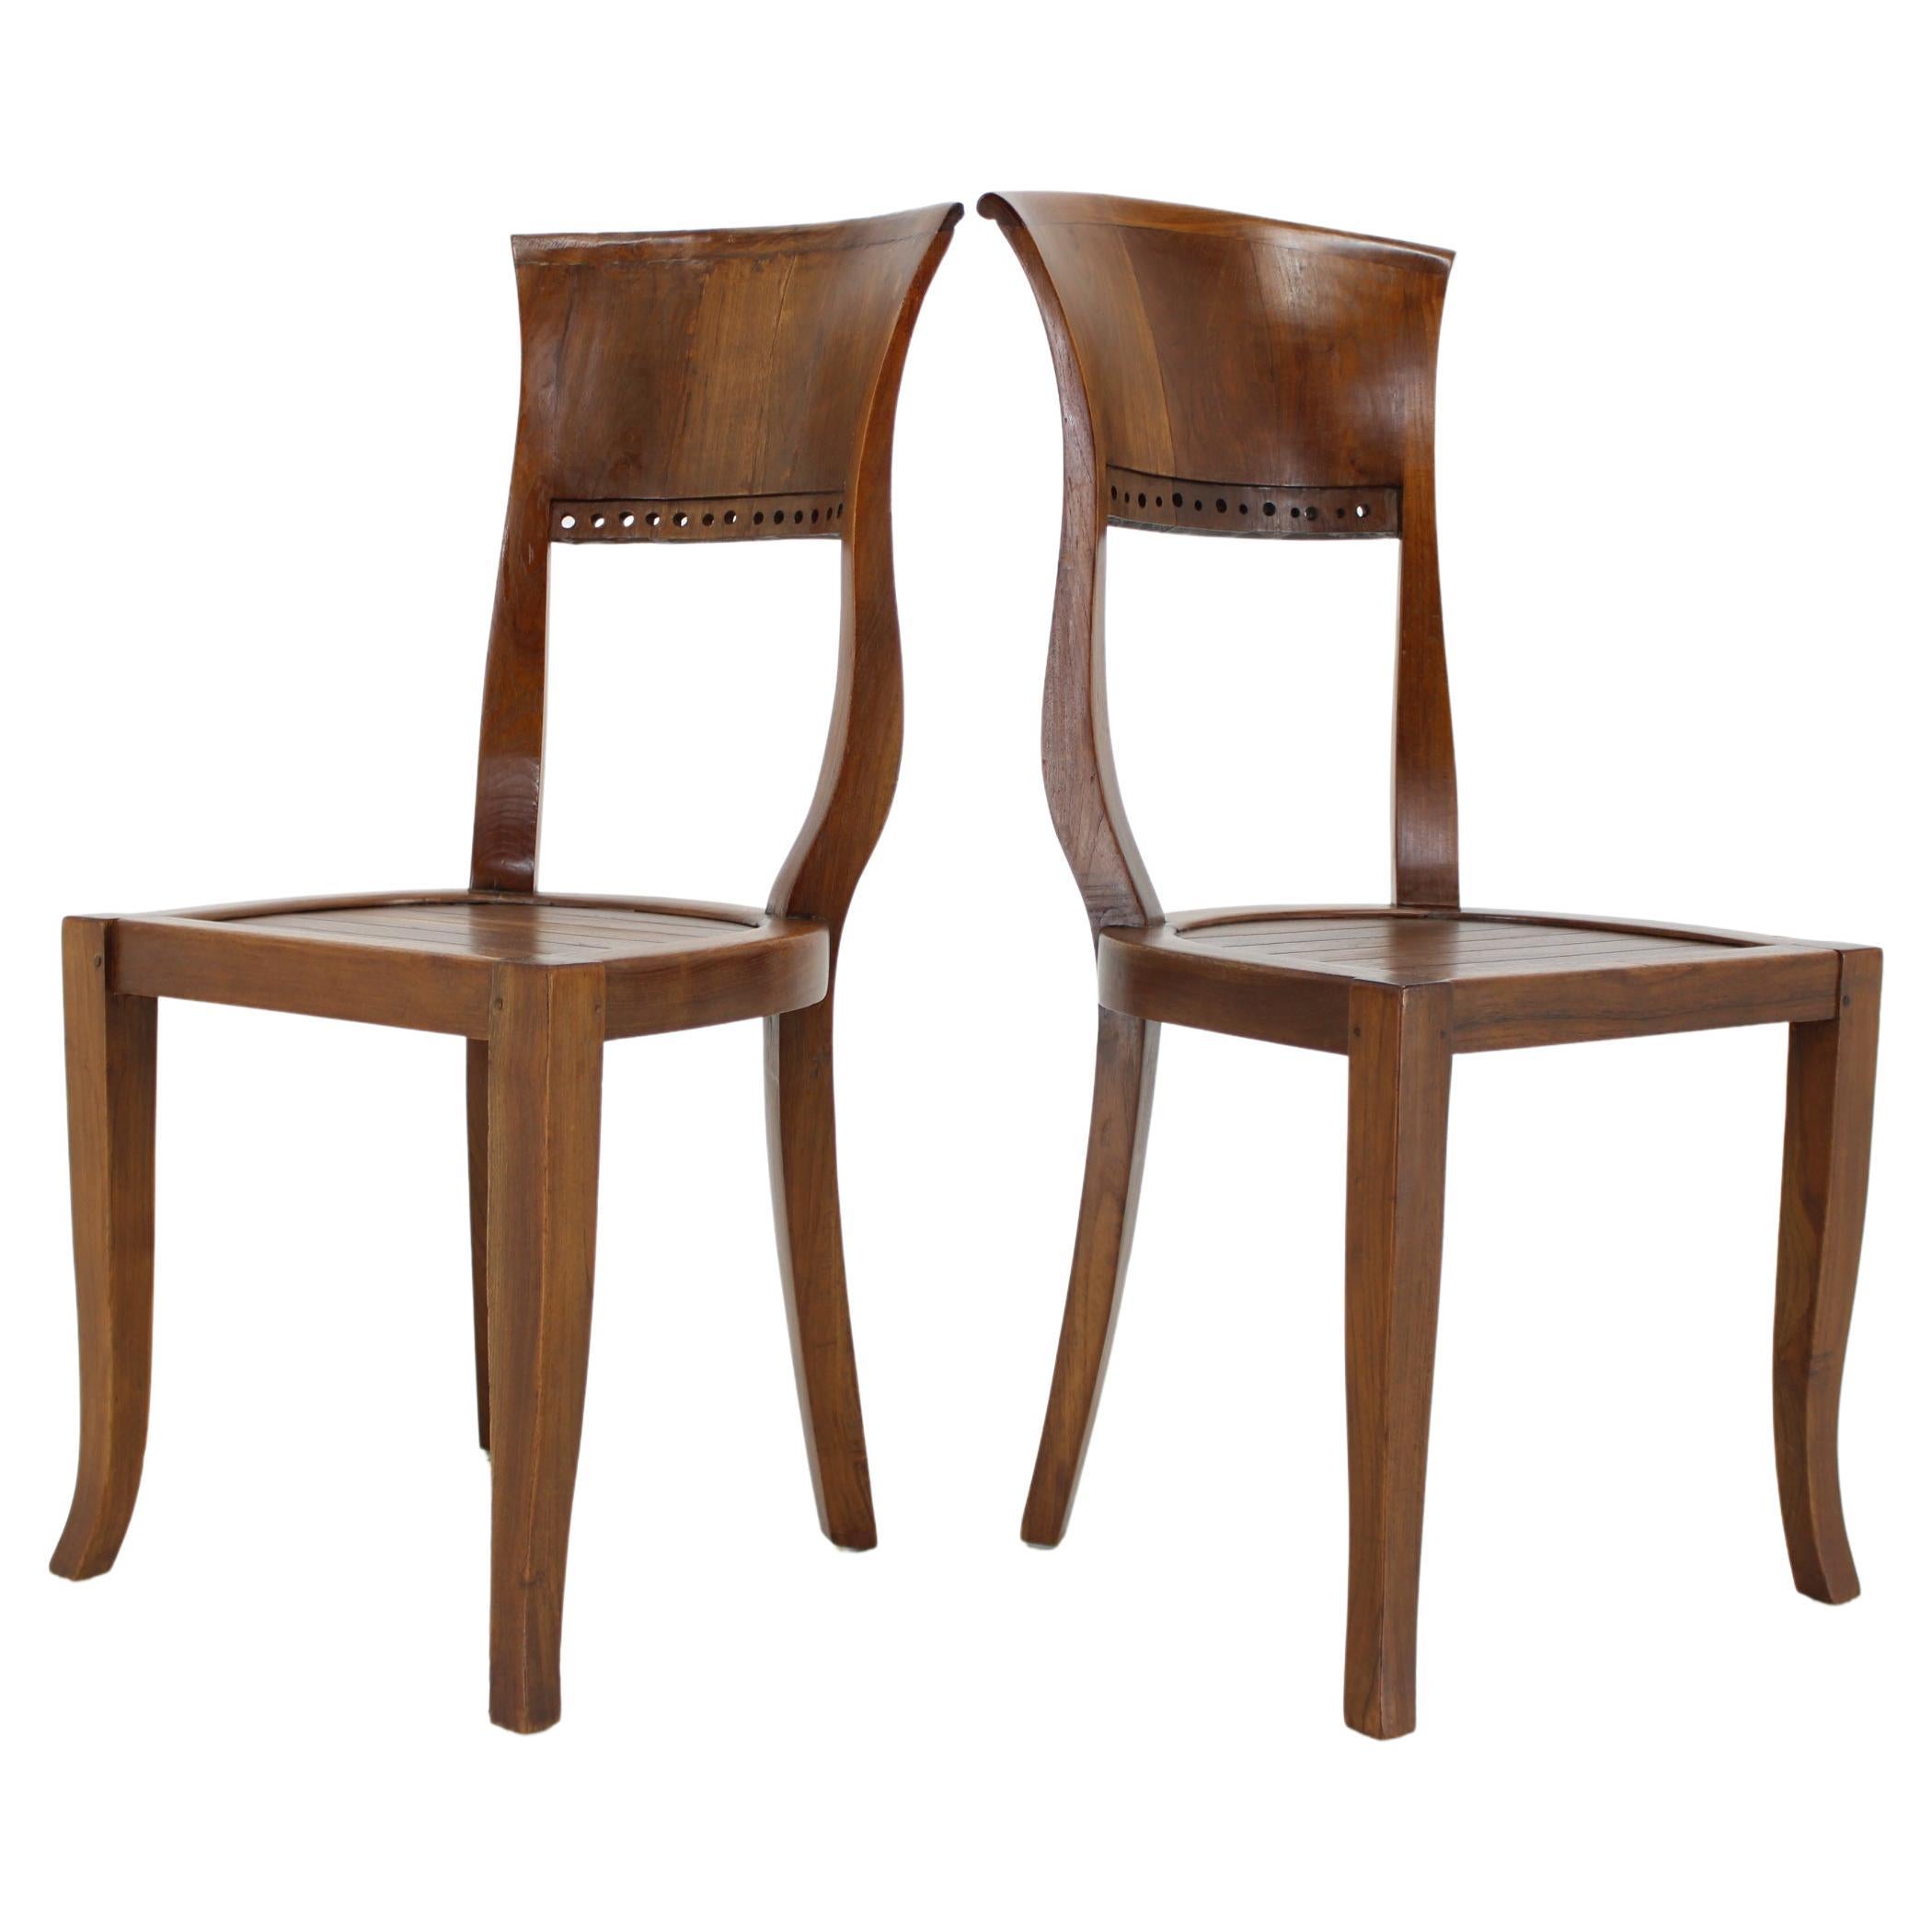  1980s Pair of Solid Teak Chairs, India  For Sale